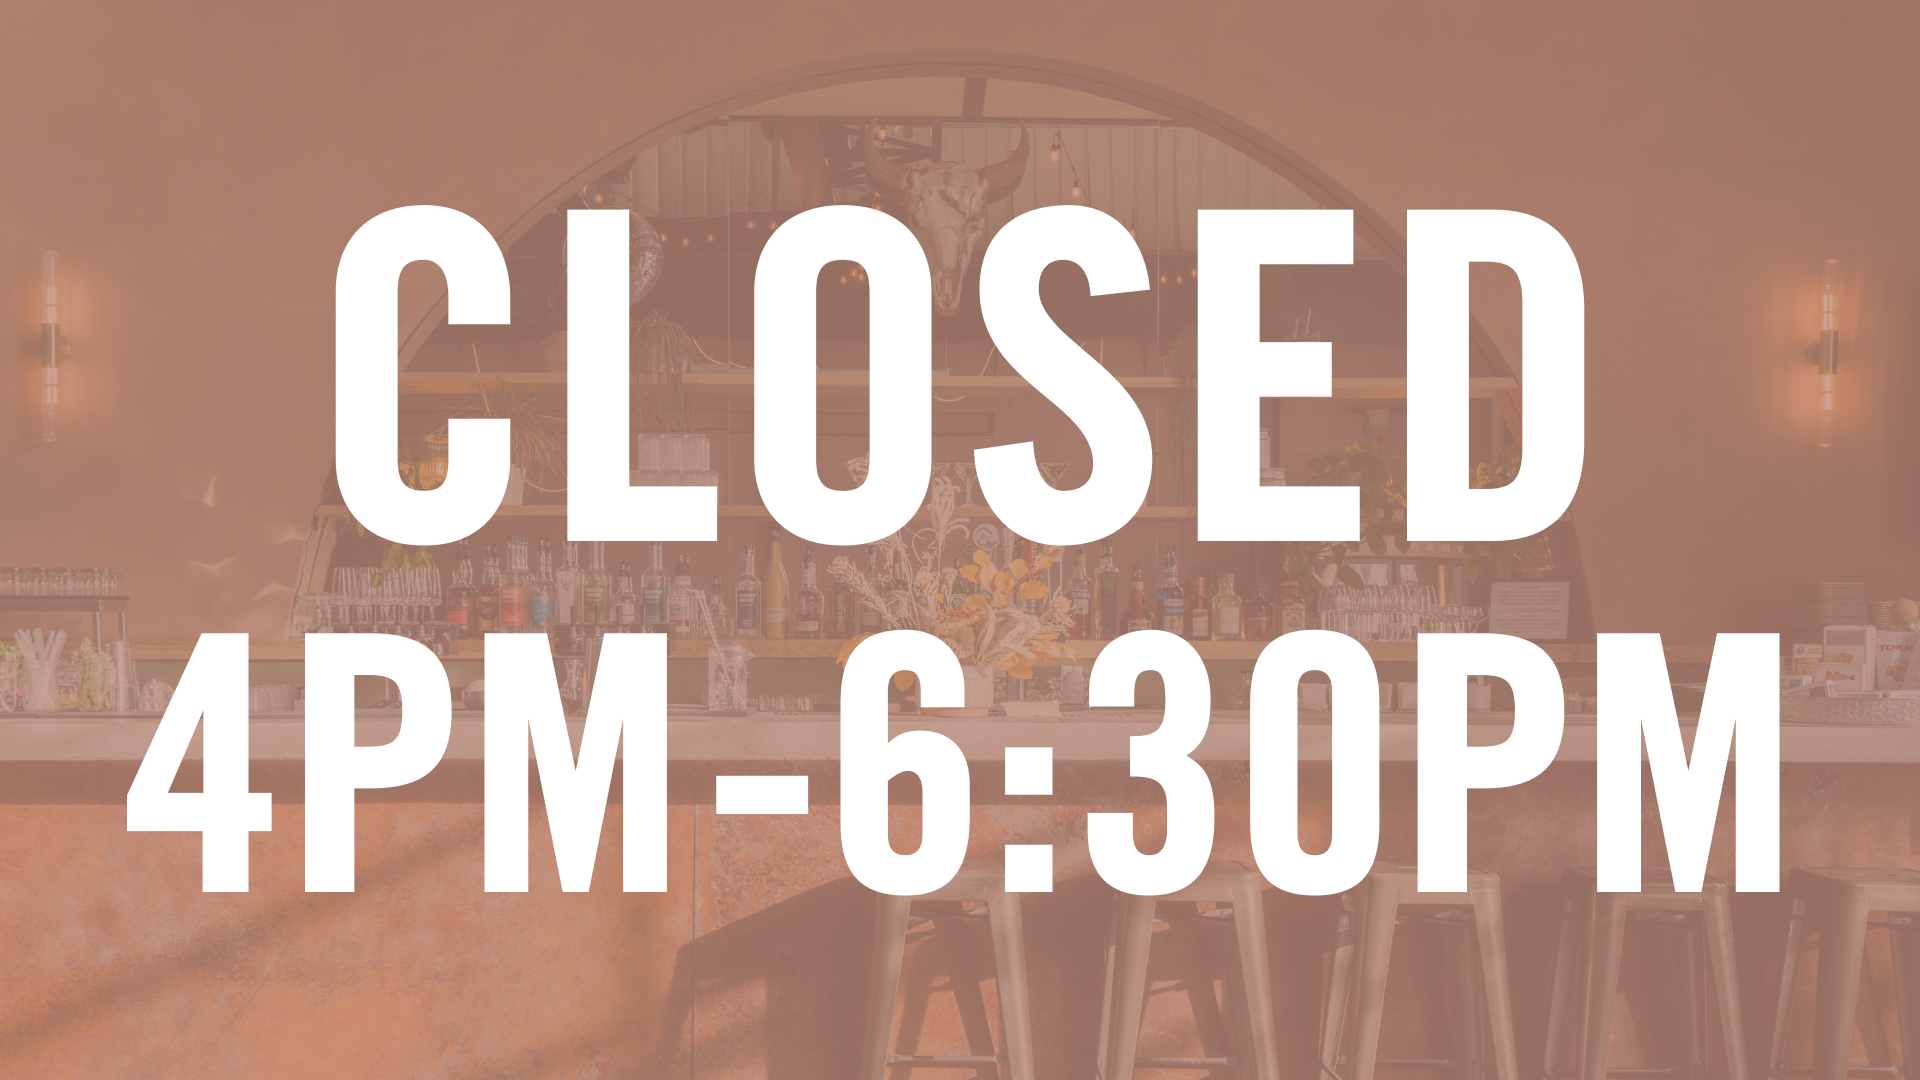 Taproom Closed from 4-6:30 PM